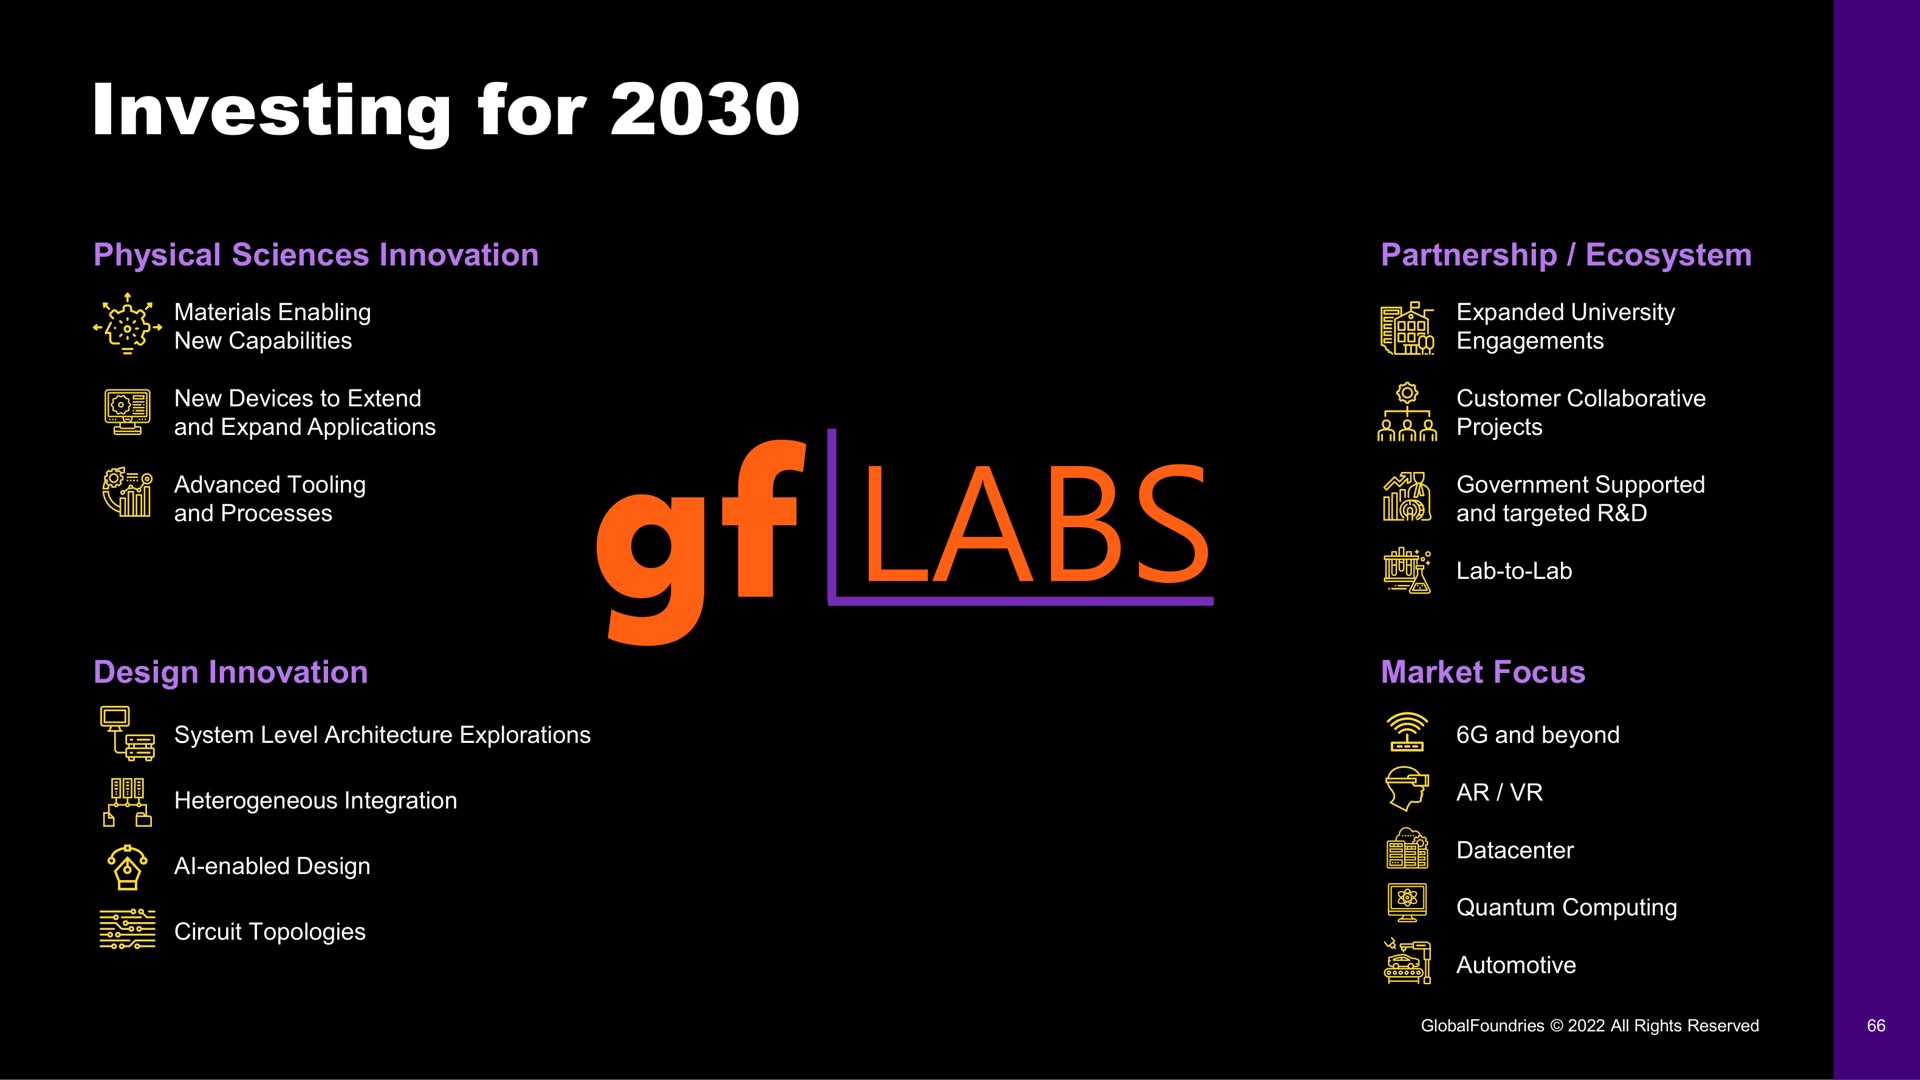 investing for labs | GlobalFoundries